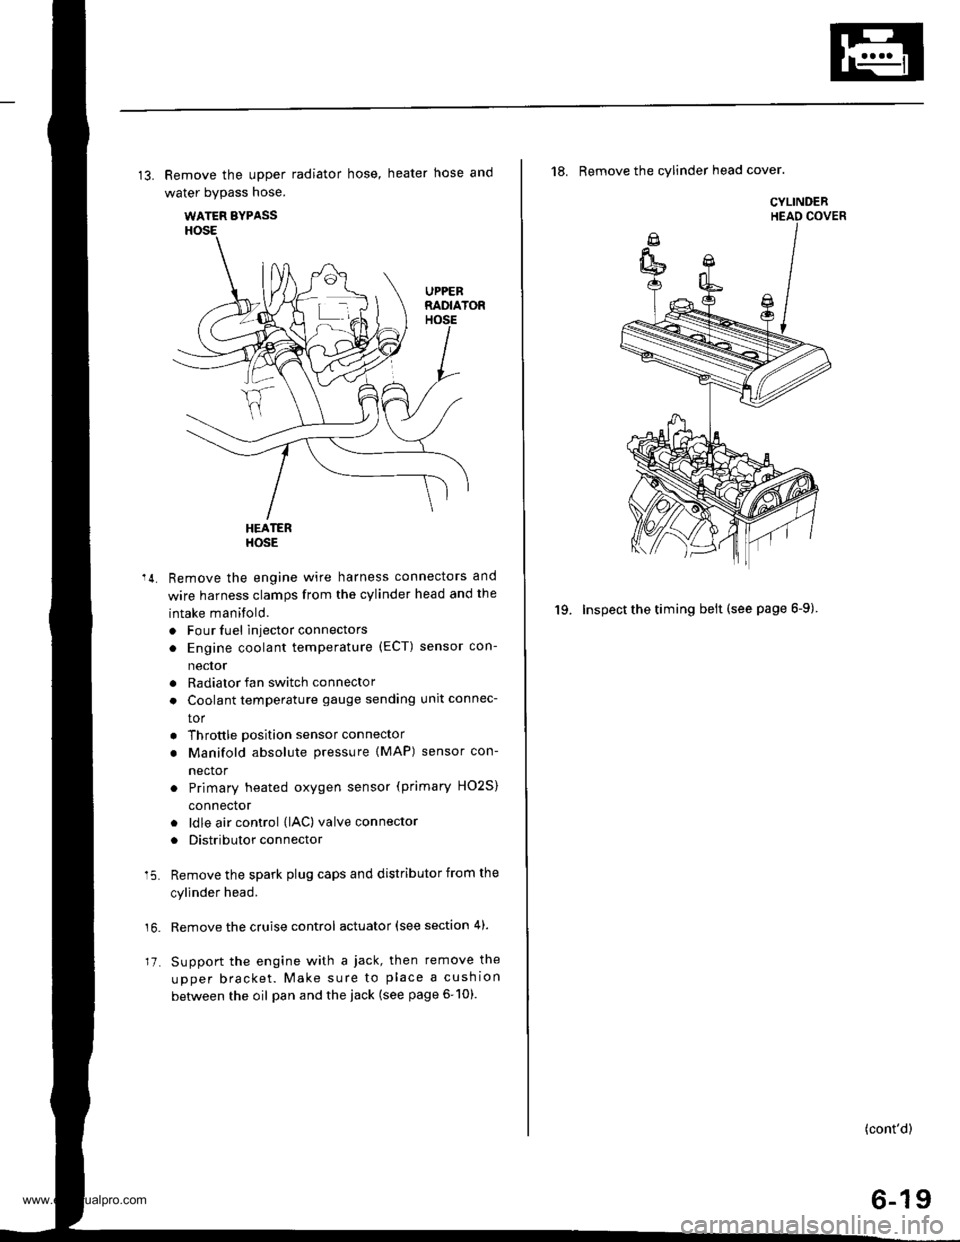 HONDA CR-V 1998 RD1-RD3 / 1.G Workshop Manual 
13. Remove the upper radiator hose, heater hose and
water bypass hose.
WATER BYPASS
UPPEBRADIATORHOSE
17
HEATERHOSE
Remove the engine wire harness connectors and
wire harness clamps from the cylinder